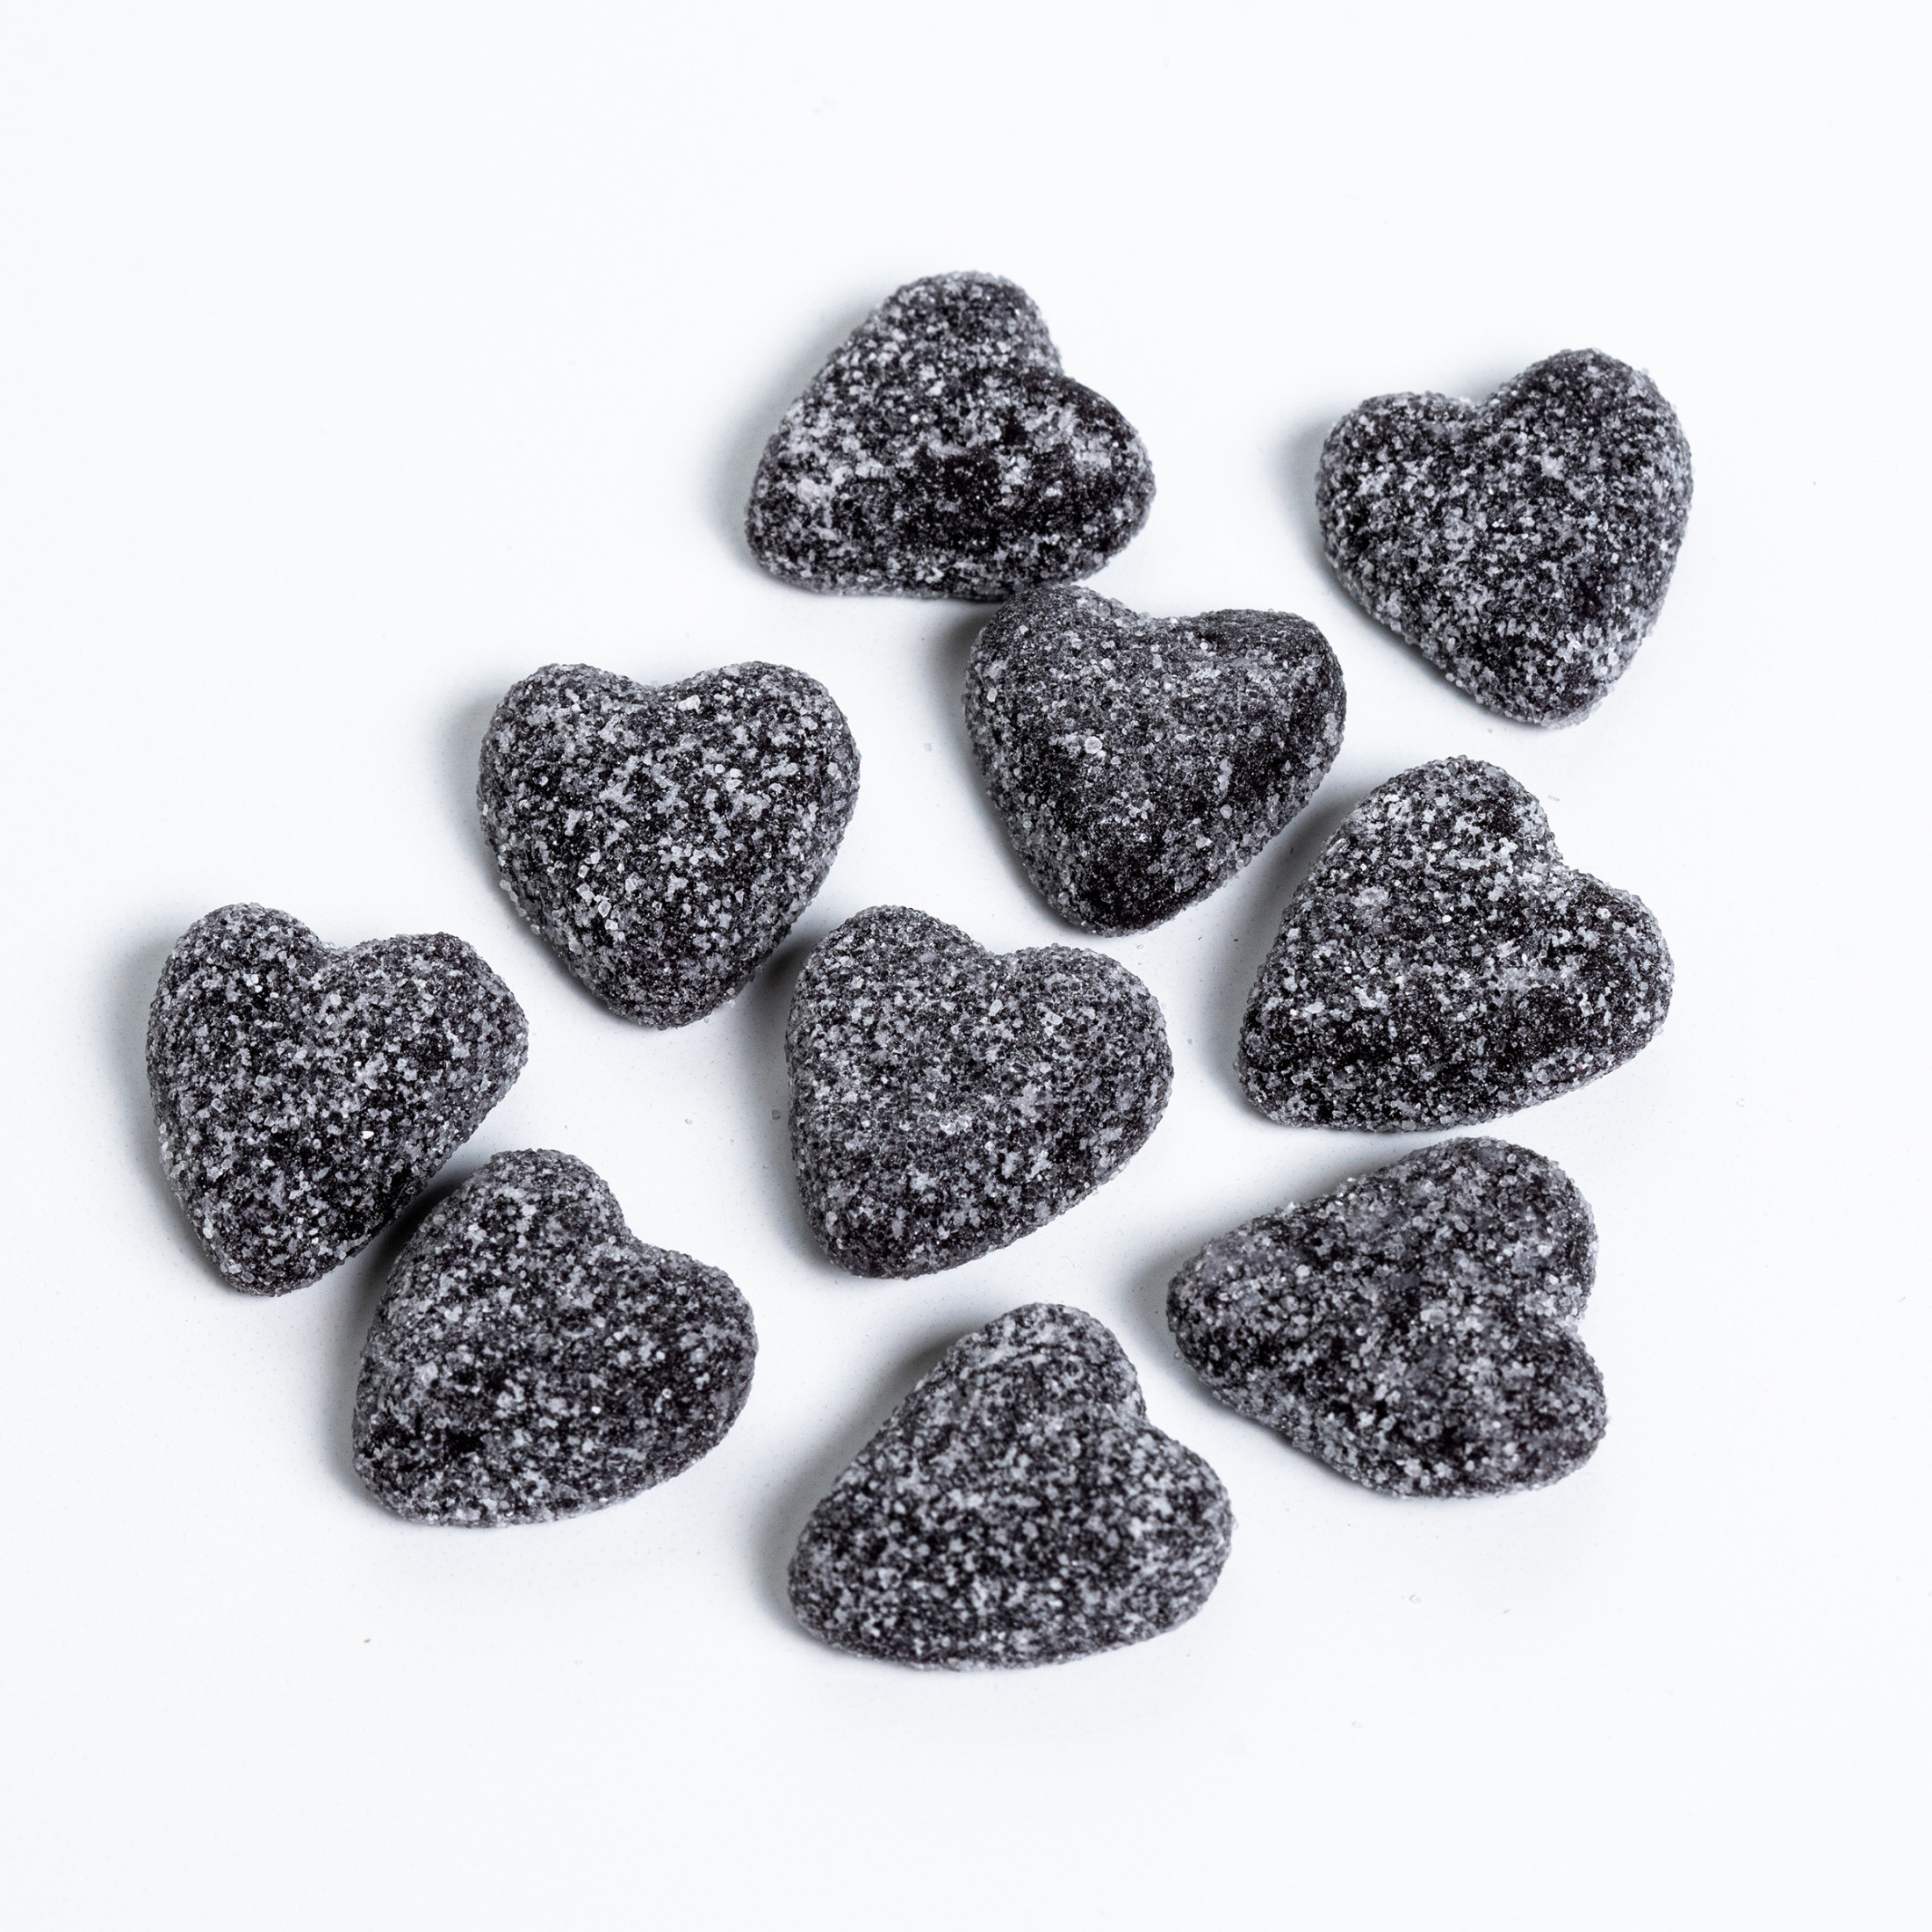 SOUR PATCH KIDS Sour Hearts Black Raspberry Soft & Chewy Candy, Valentines Candy, 3.08 oz - image 3 of 10